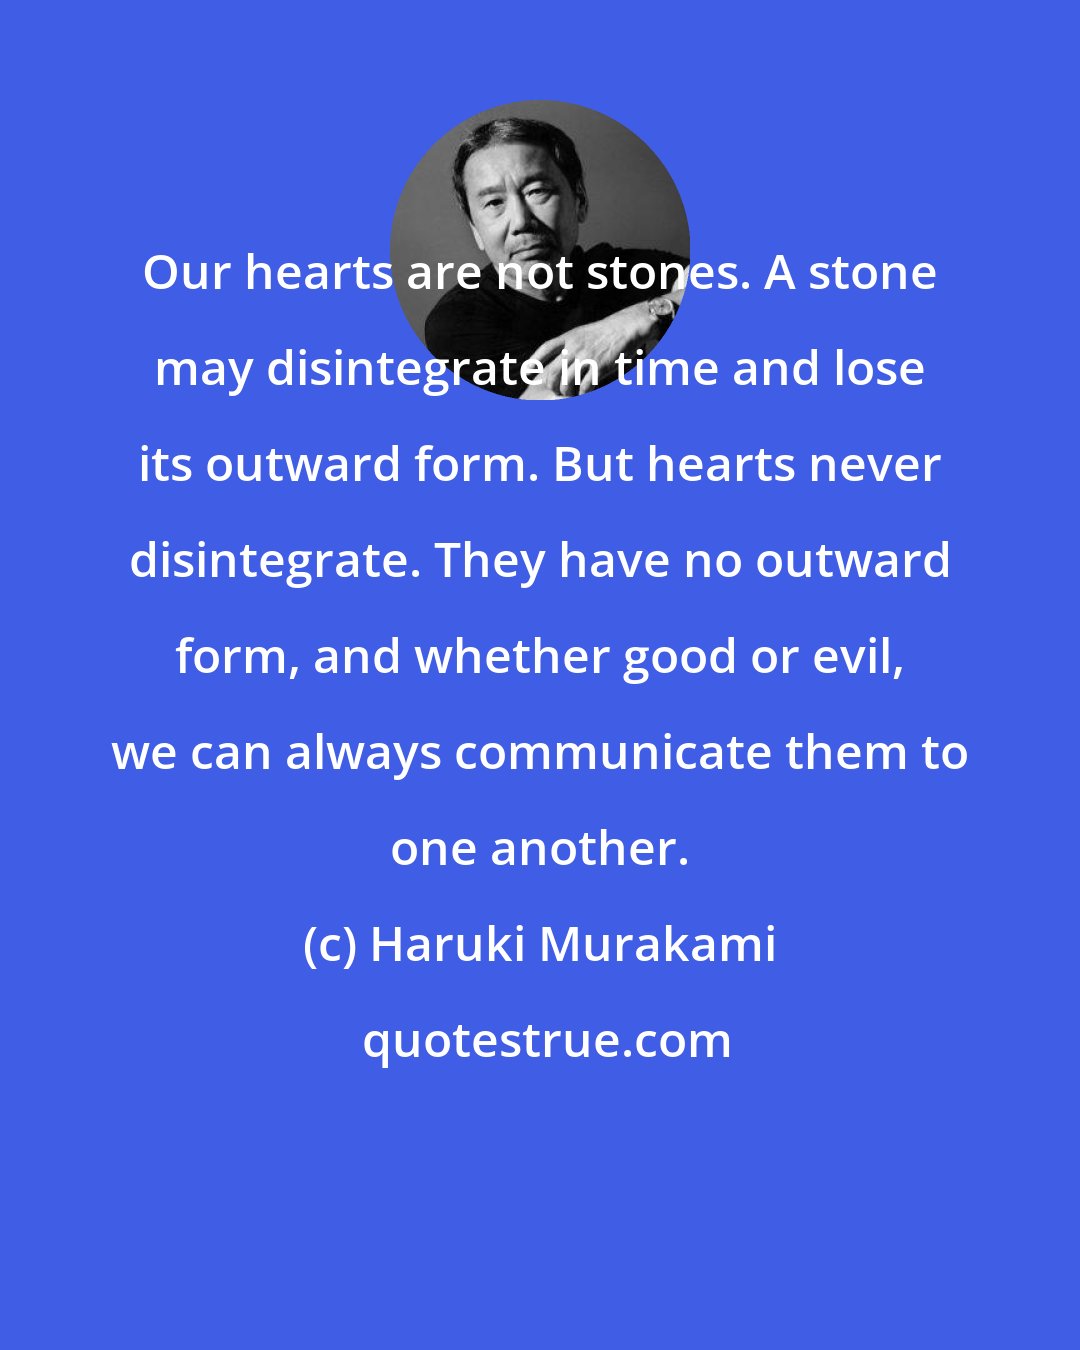 Haruki Murakami: Our hearts are not stones. A stone may disintegrate in time and lose its outward form. But hearts never disintegrate. They have no outward form, and whether good or evil, we can always communicate them to one another.